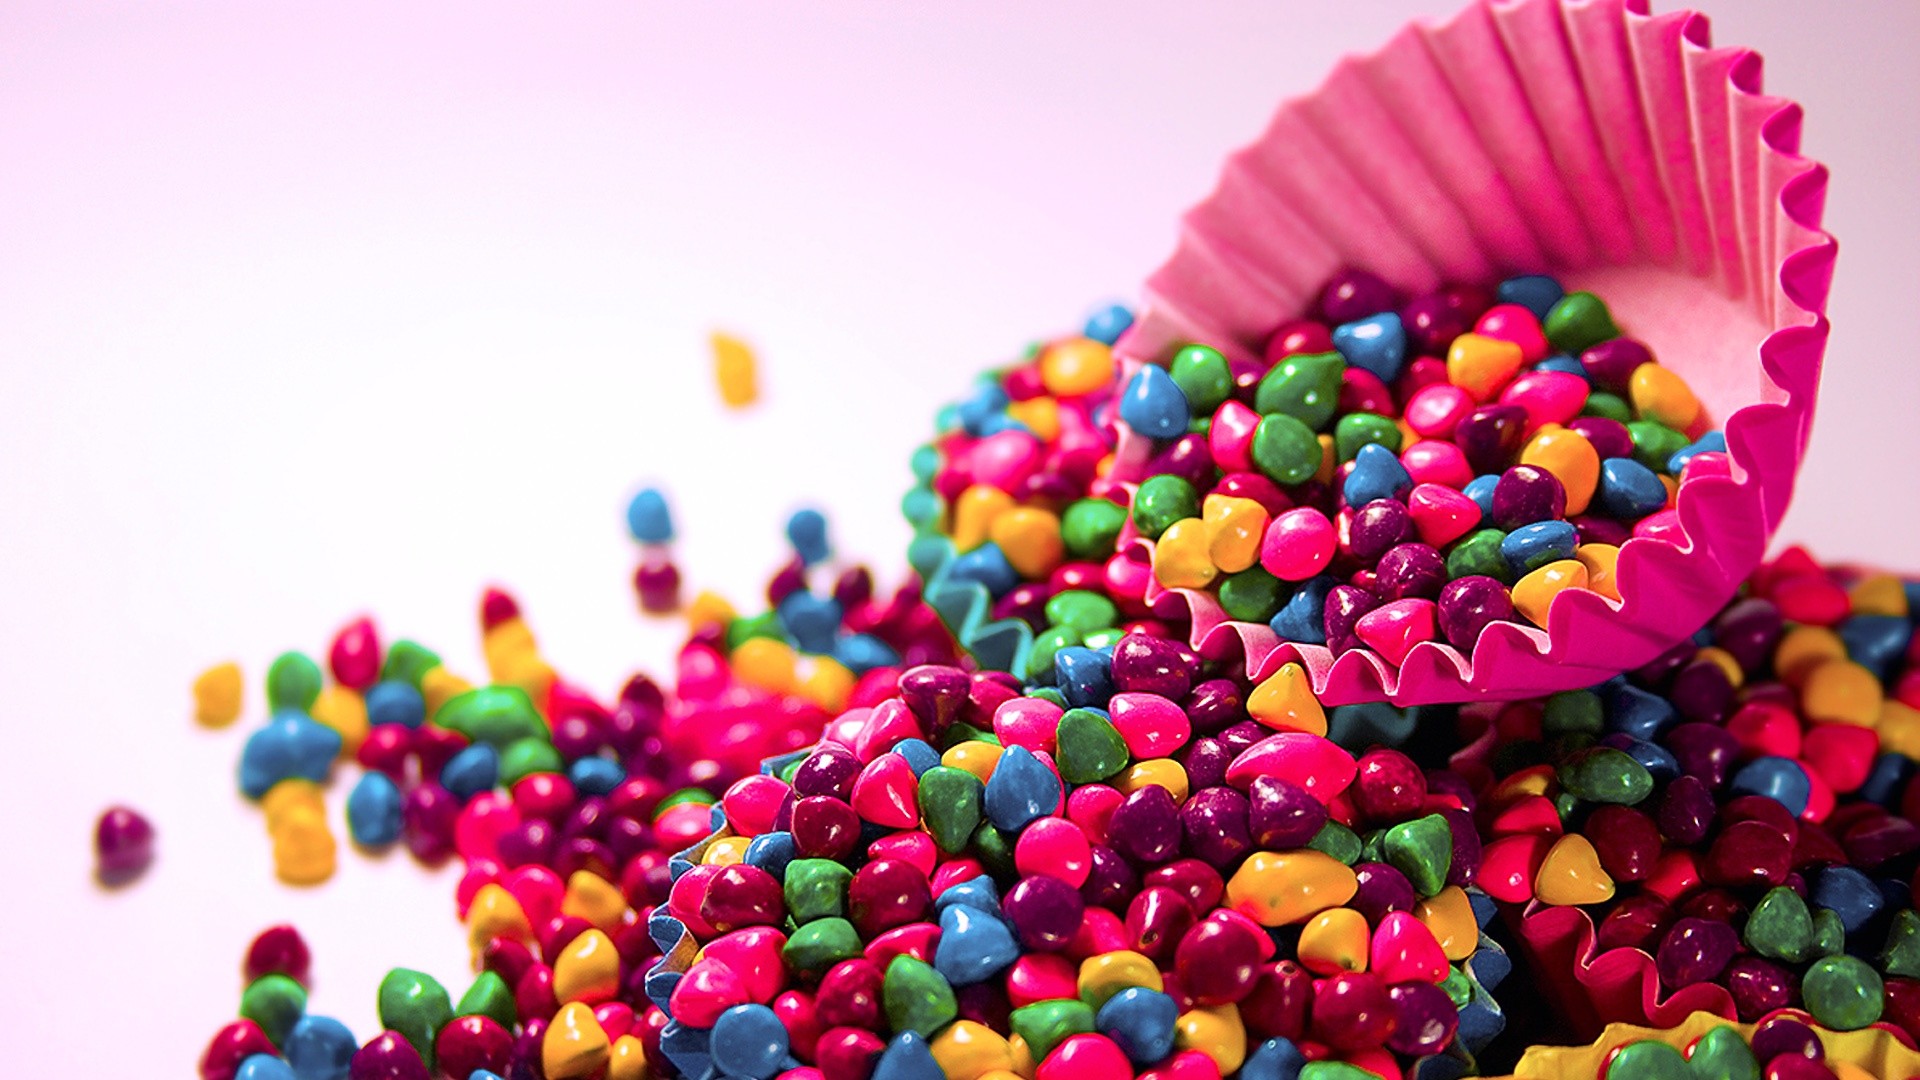 Colorful Candys In Basket Abstract Hd Desktop Wallpapers | Daily ...